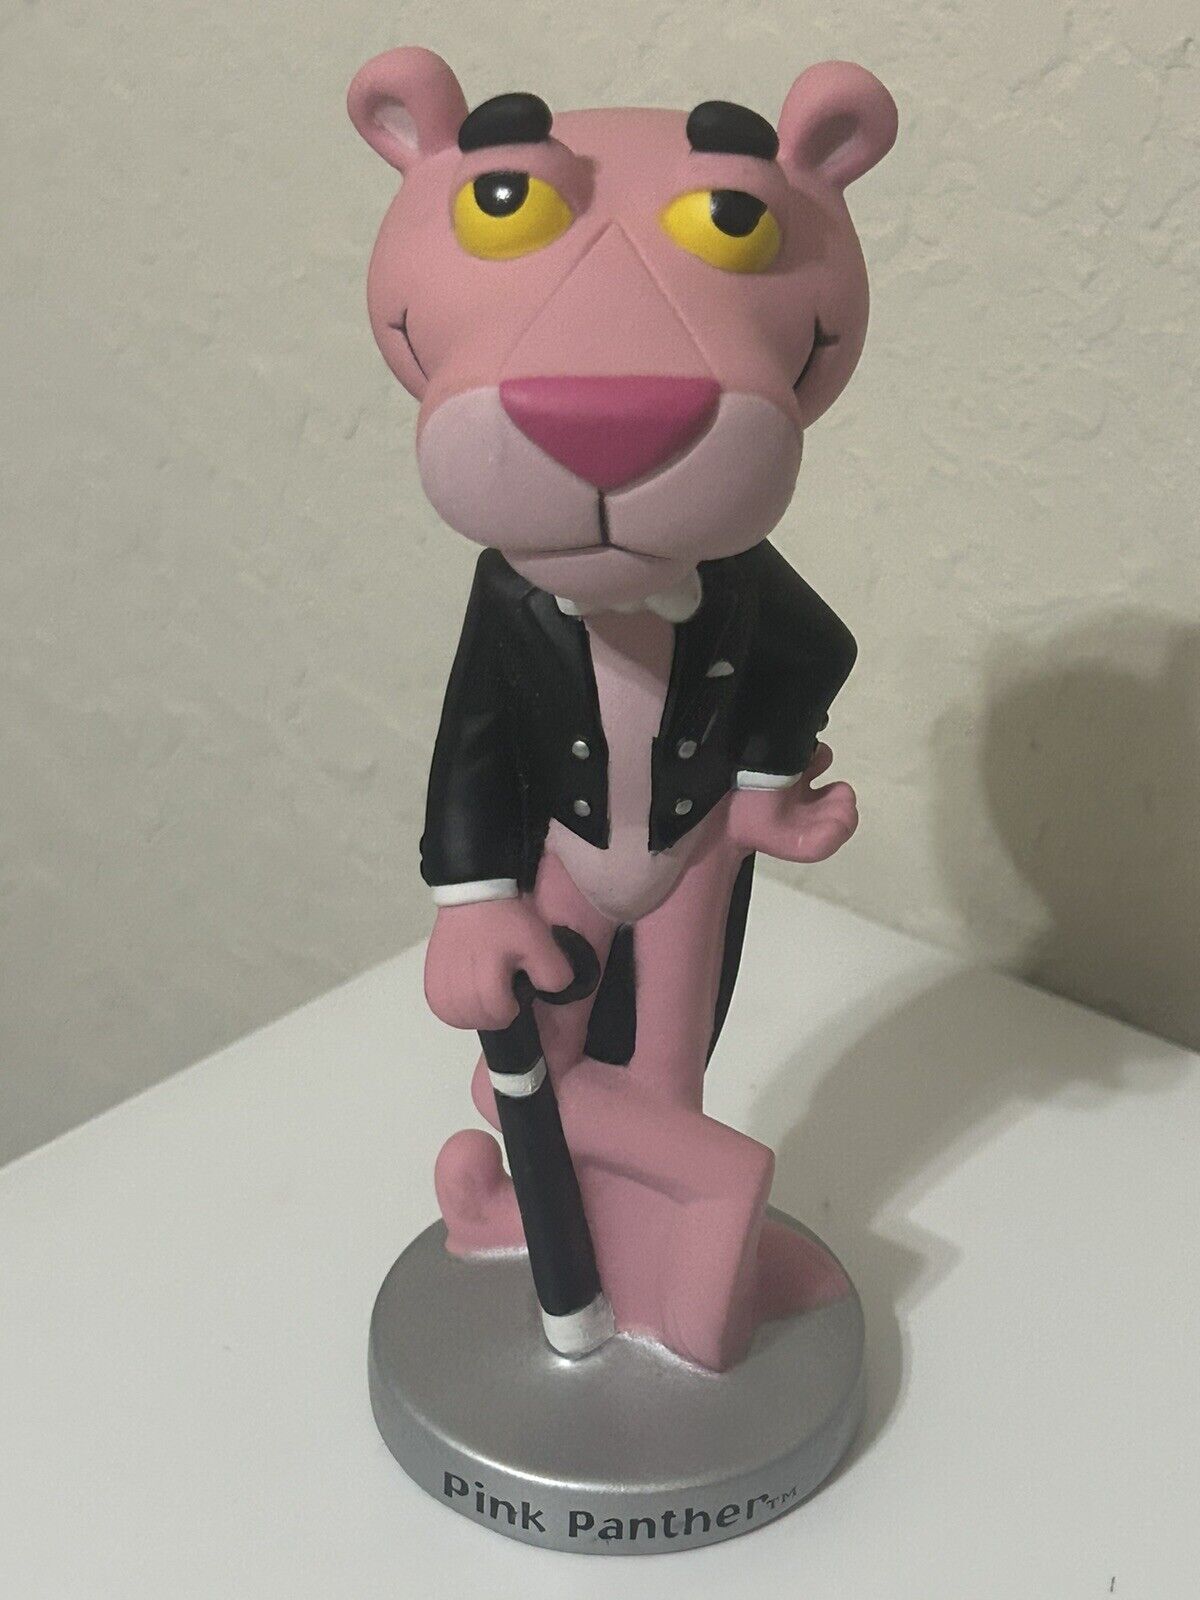 Funko Wacky Wobblers PINK PANTHER Bobble Head Toy - 2001